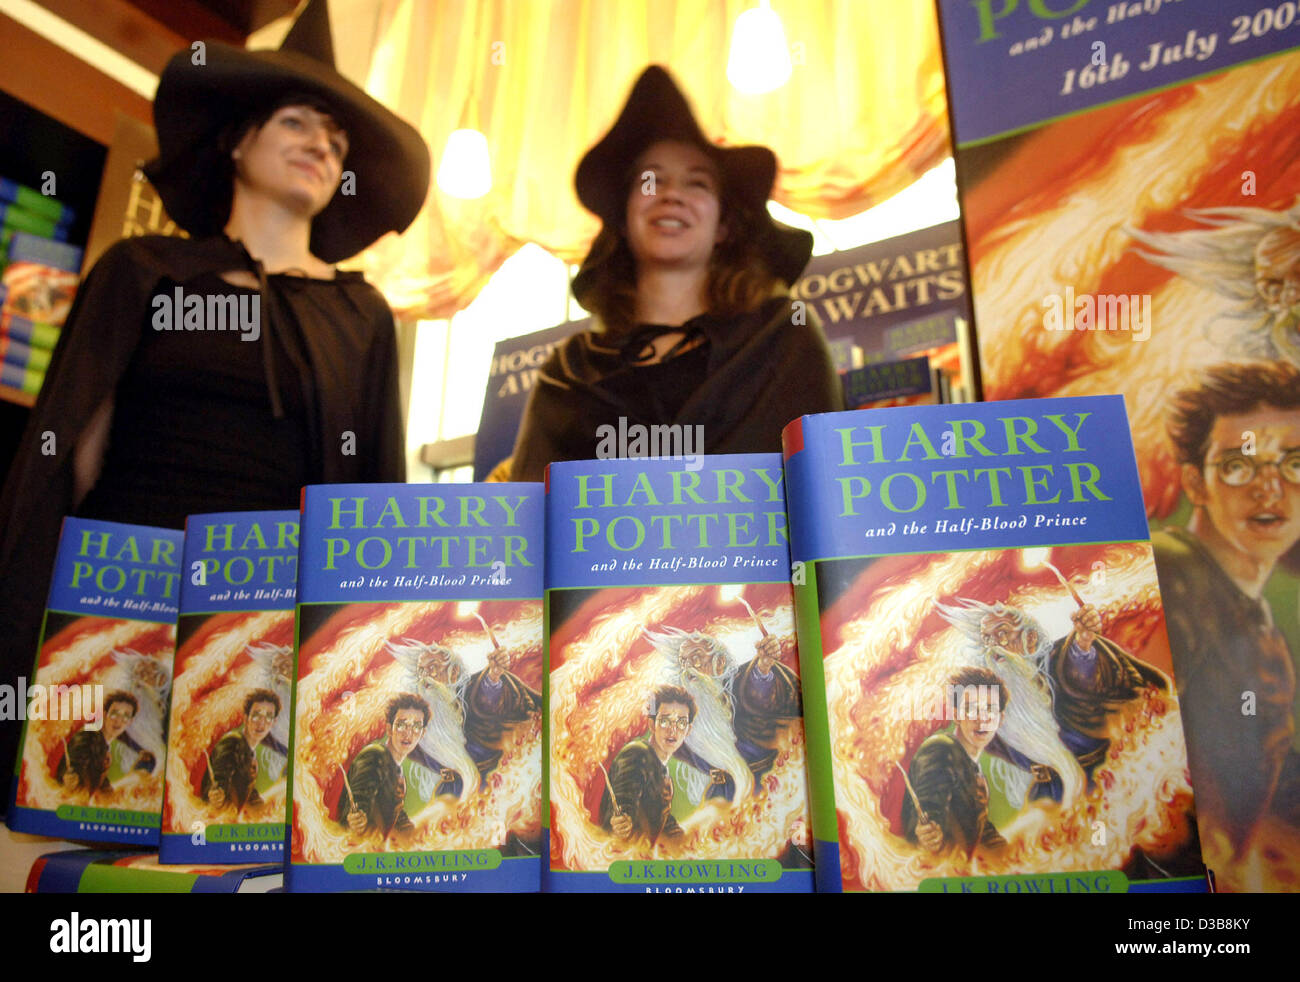 (dpa) - Two book sellers dressed in witch costumes stand behind a display of  Harry Potter books in Berlin, Saturday, 16 July 2005. Since the morning of Saturday 16 July 2005 the long awaited original version of the sixth volume 'Harry Potter and the Half-Blood Prince' by British author J.K. Rowling Stock Photo